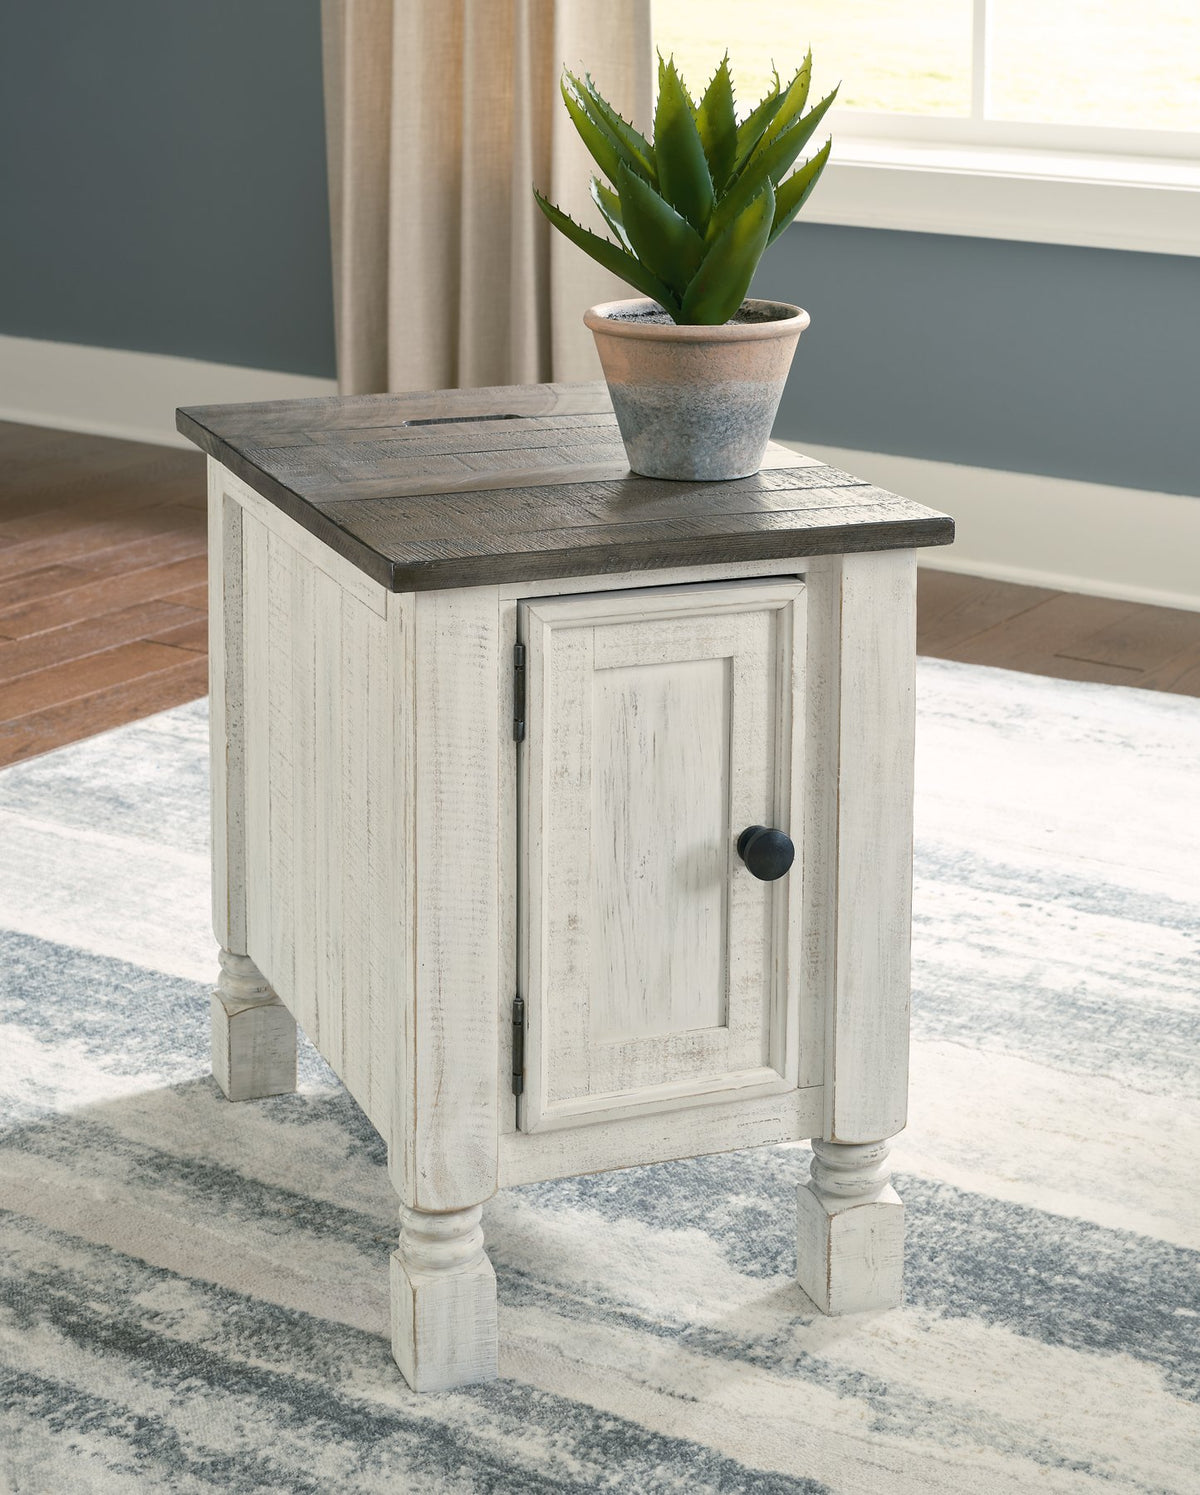 Havalance Chairside End Table  Half Price Furniture